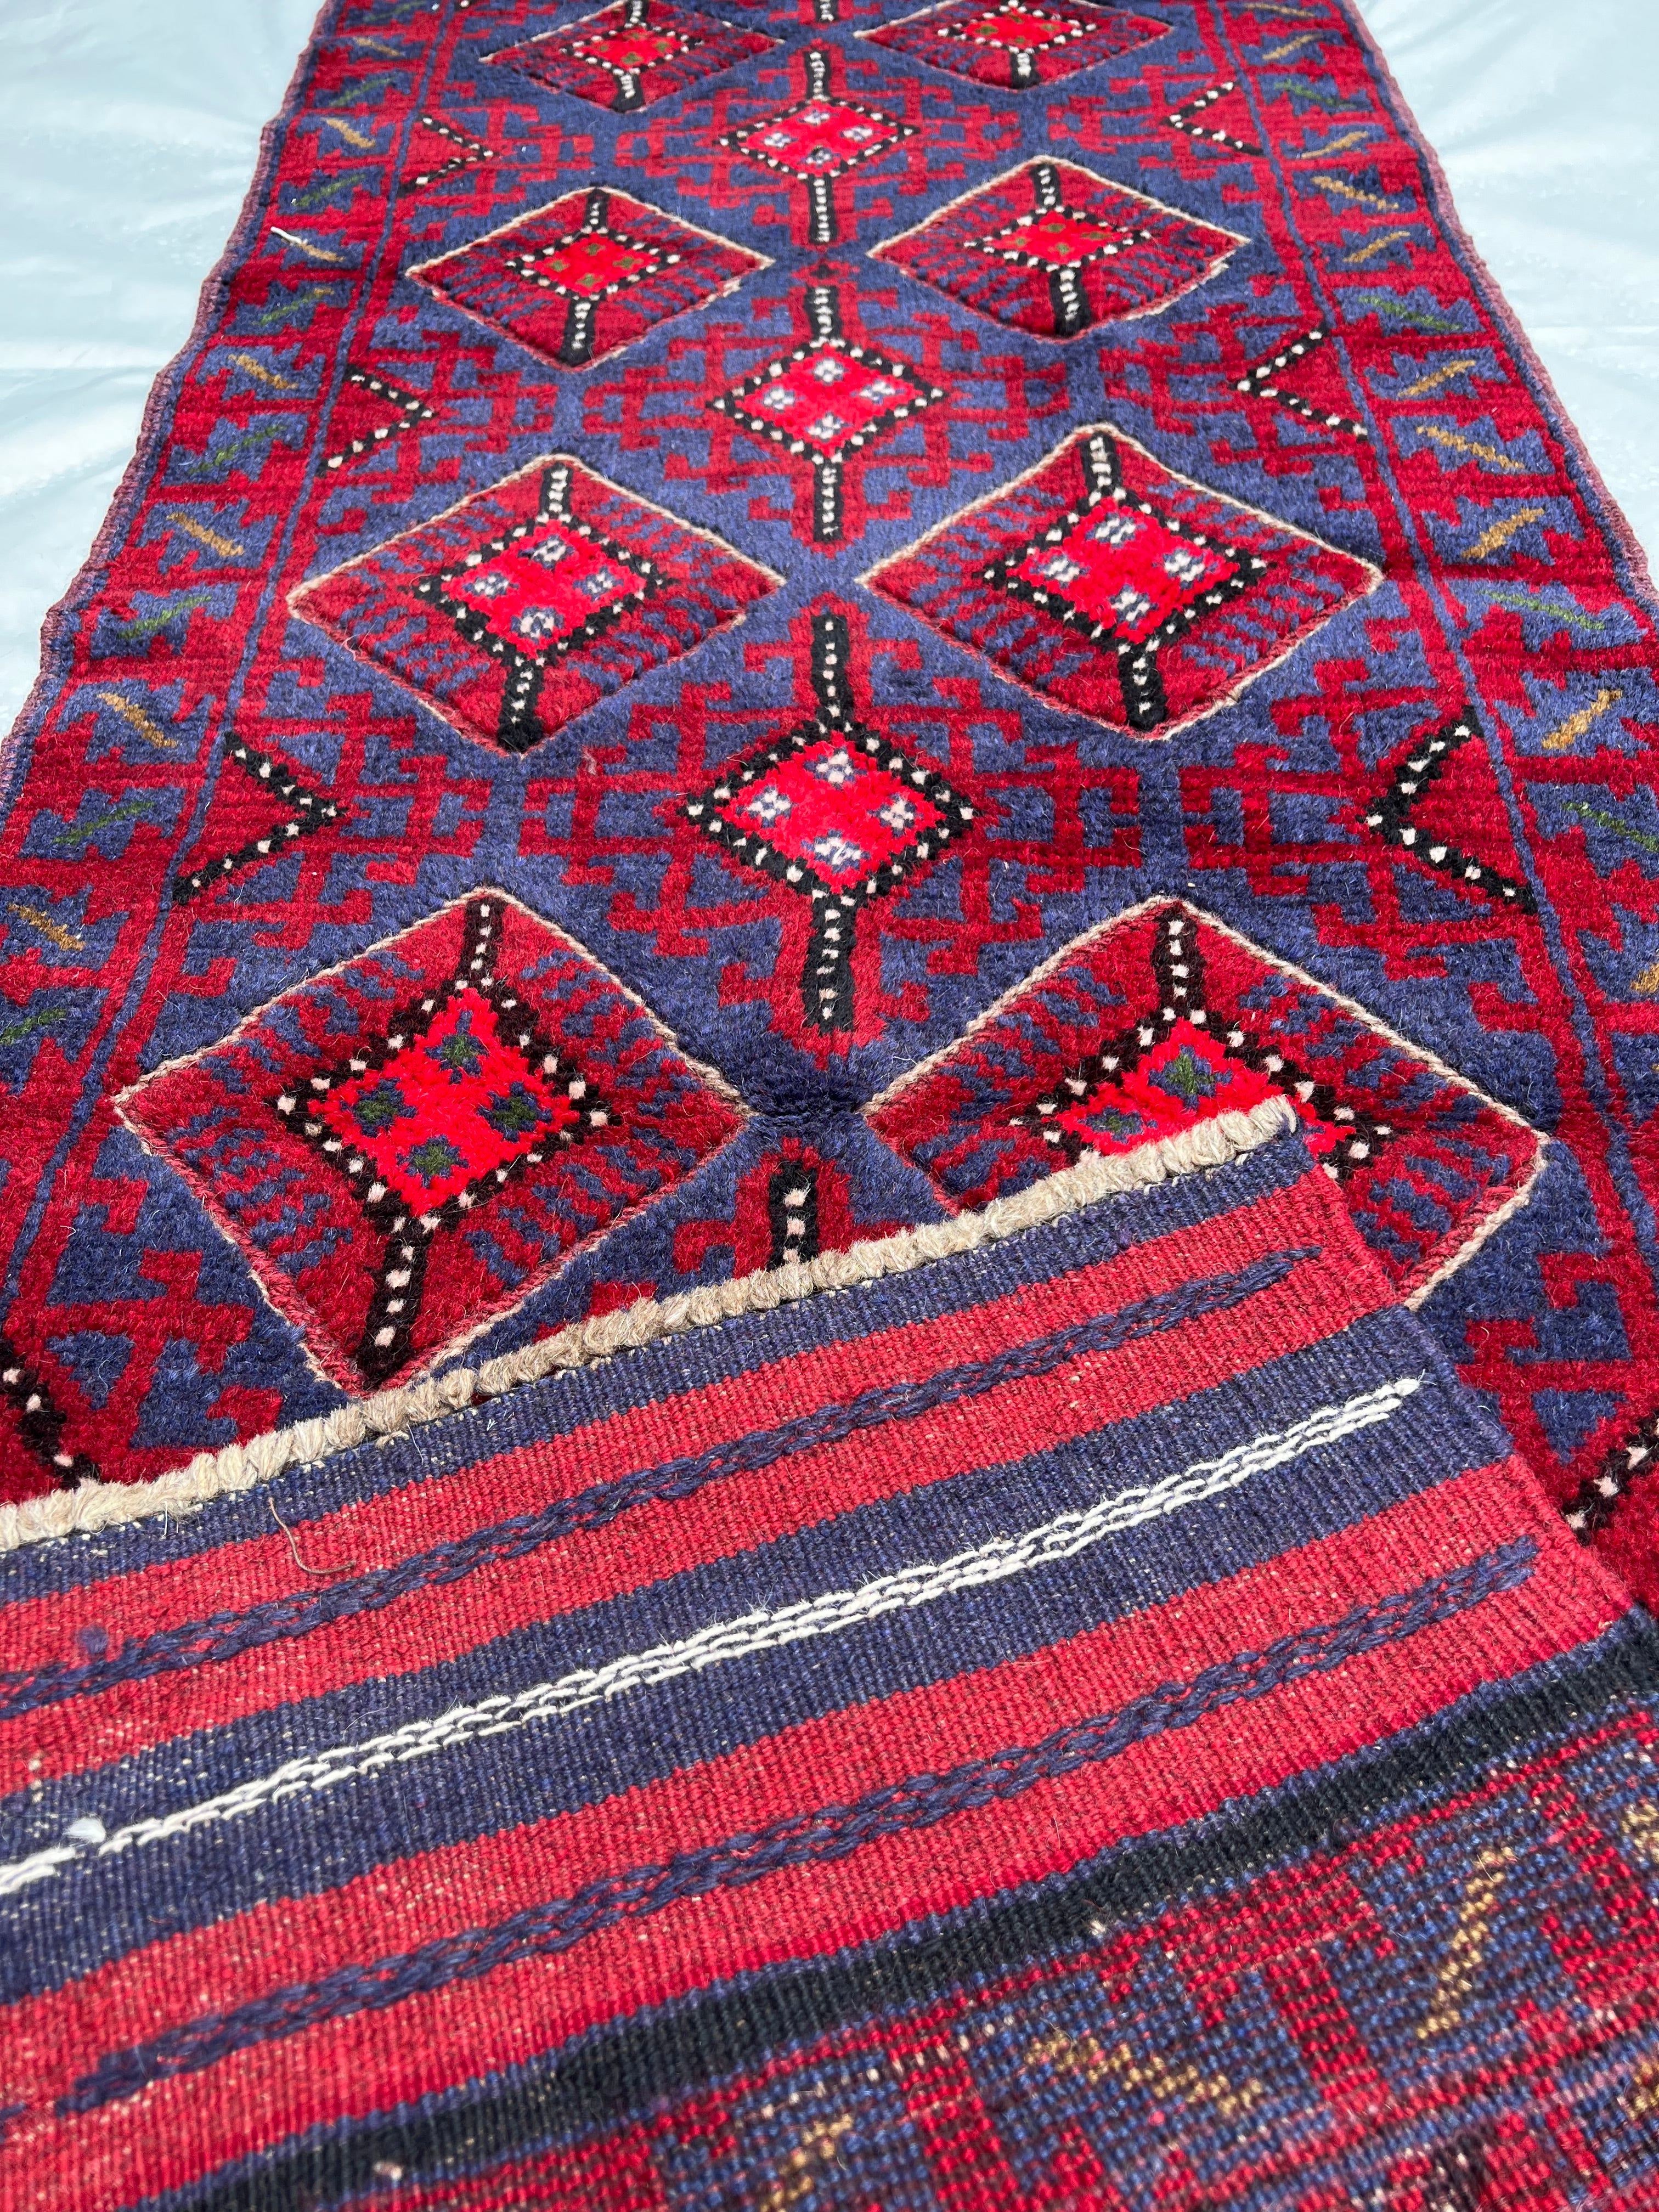 Afghan Hand Knitted/Knotted Hallway Runner Hand Woven Rug Size 8.7ft x 2ft  (MA-RU-8X2-R/DB-N) Mashwani Kilim (Herat)